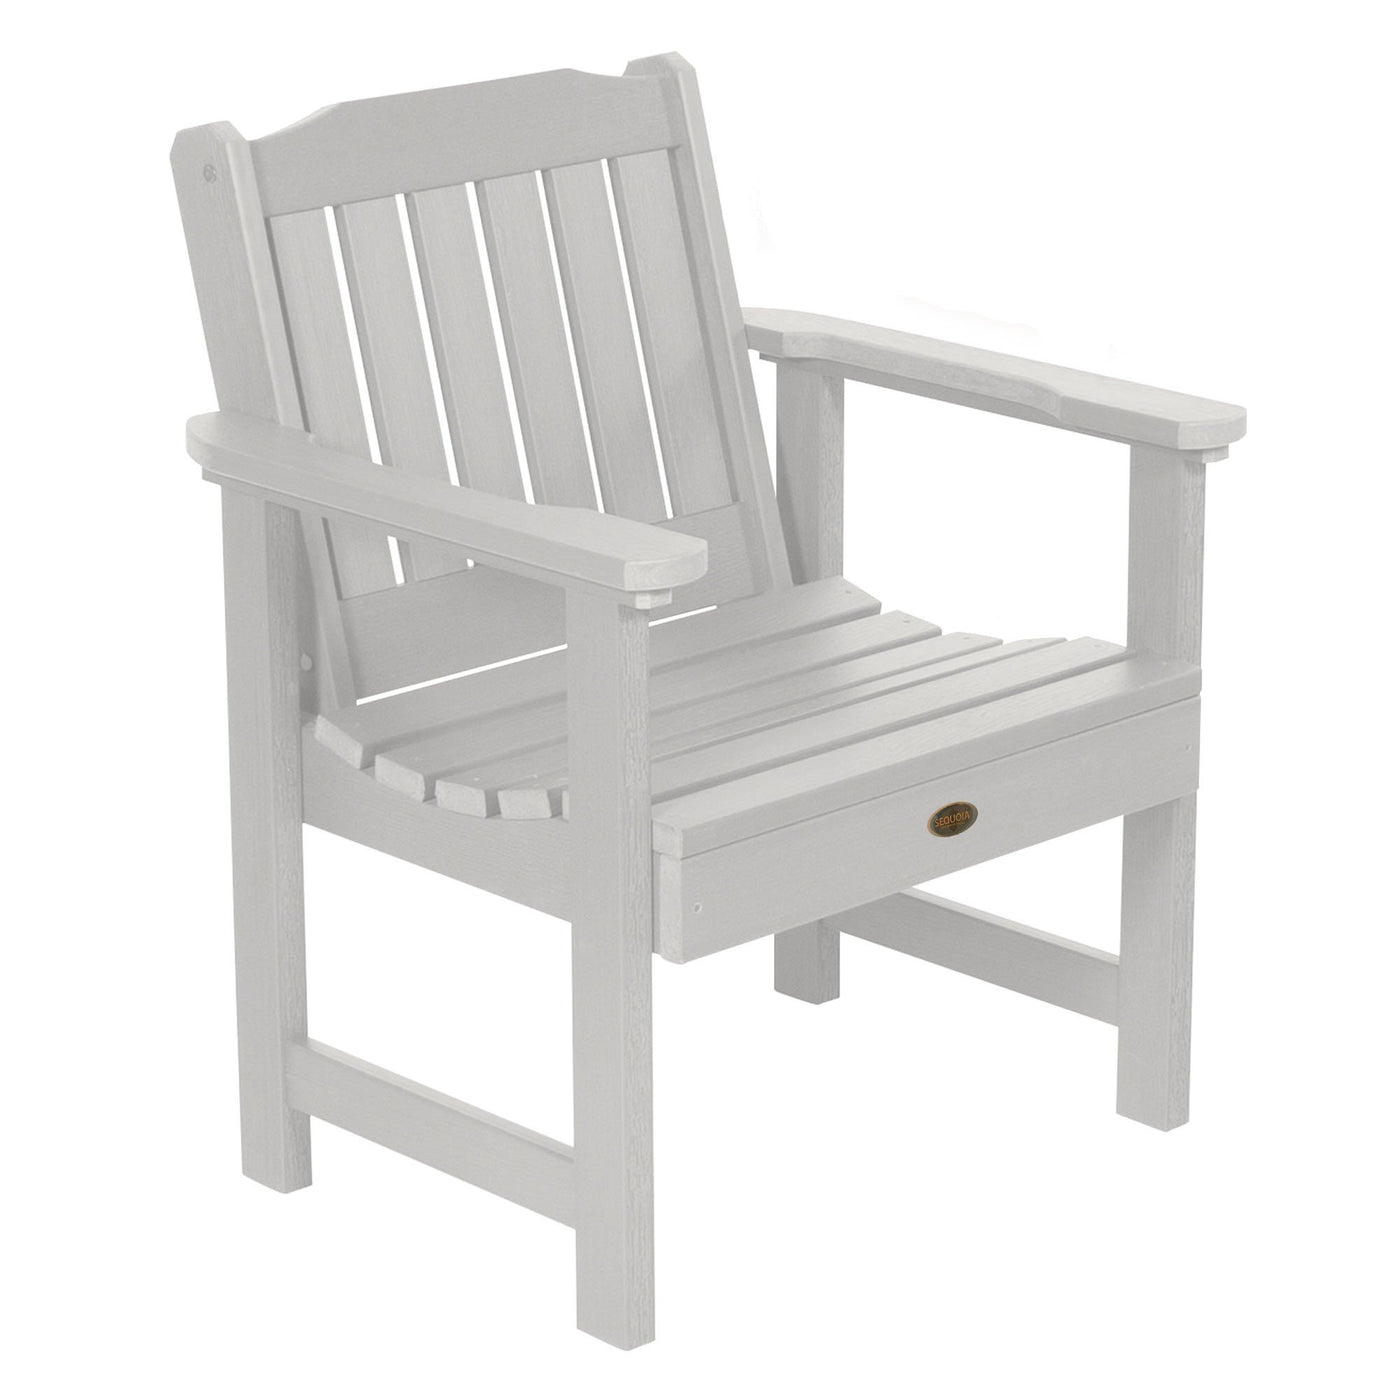 Commercial Grade "Springville" Lounge Chair Sequoia Professional White 